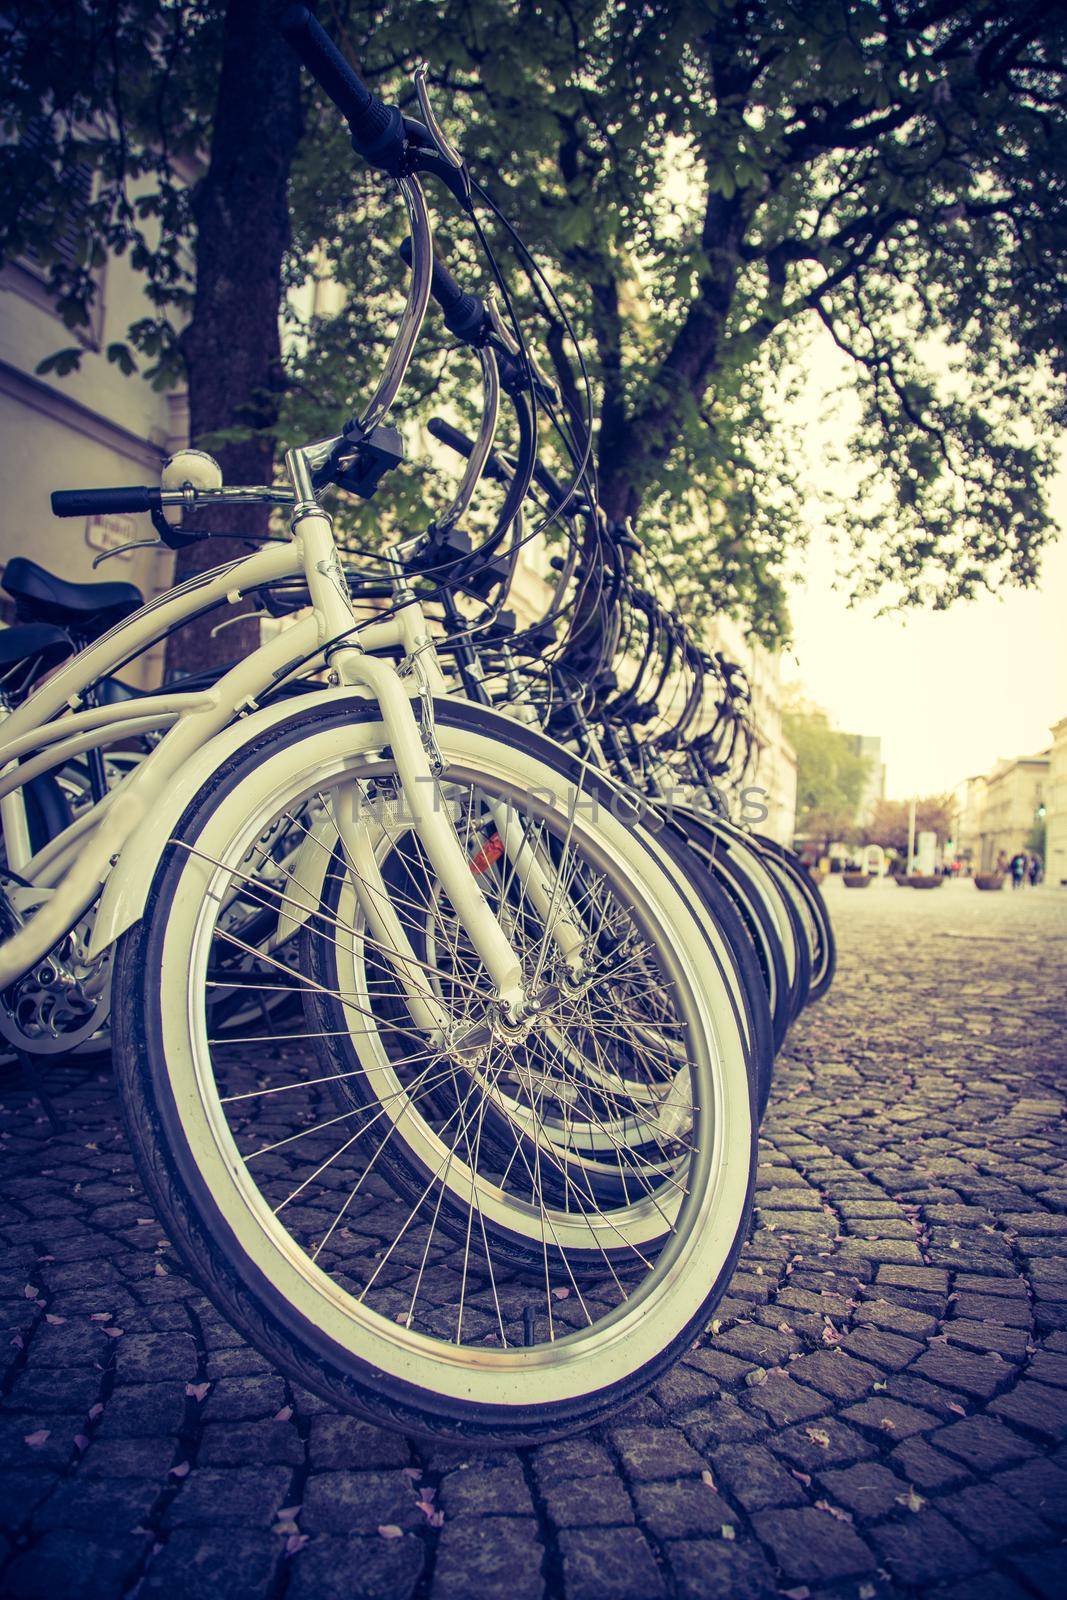 Renting bikes: Parking bikes for exploring the city, tourist attraction by Daxenbichler